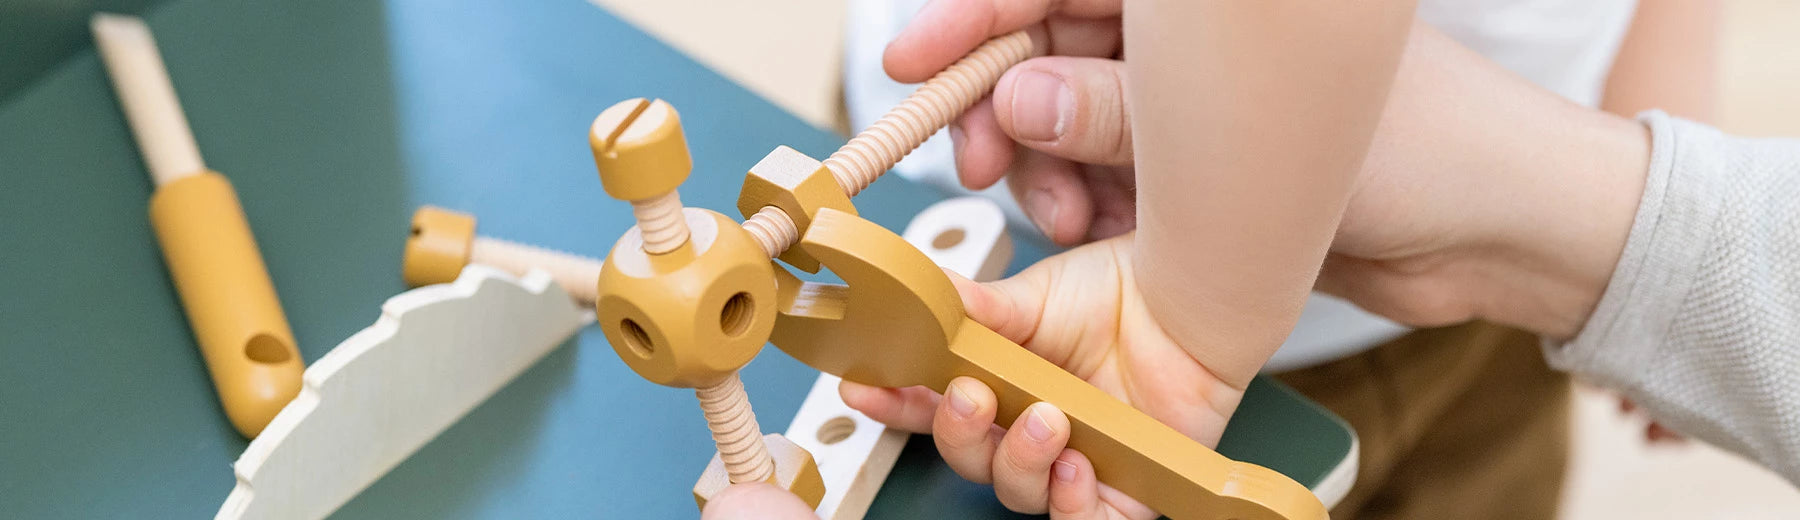 children playing with wooden construction toys from FLEXA